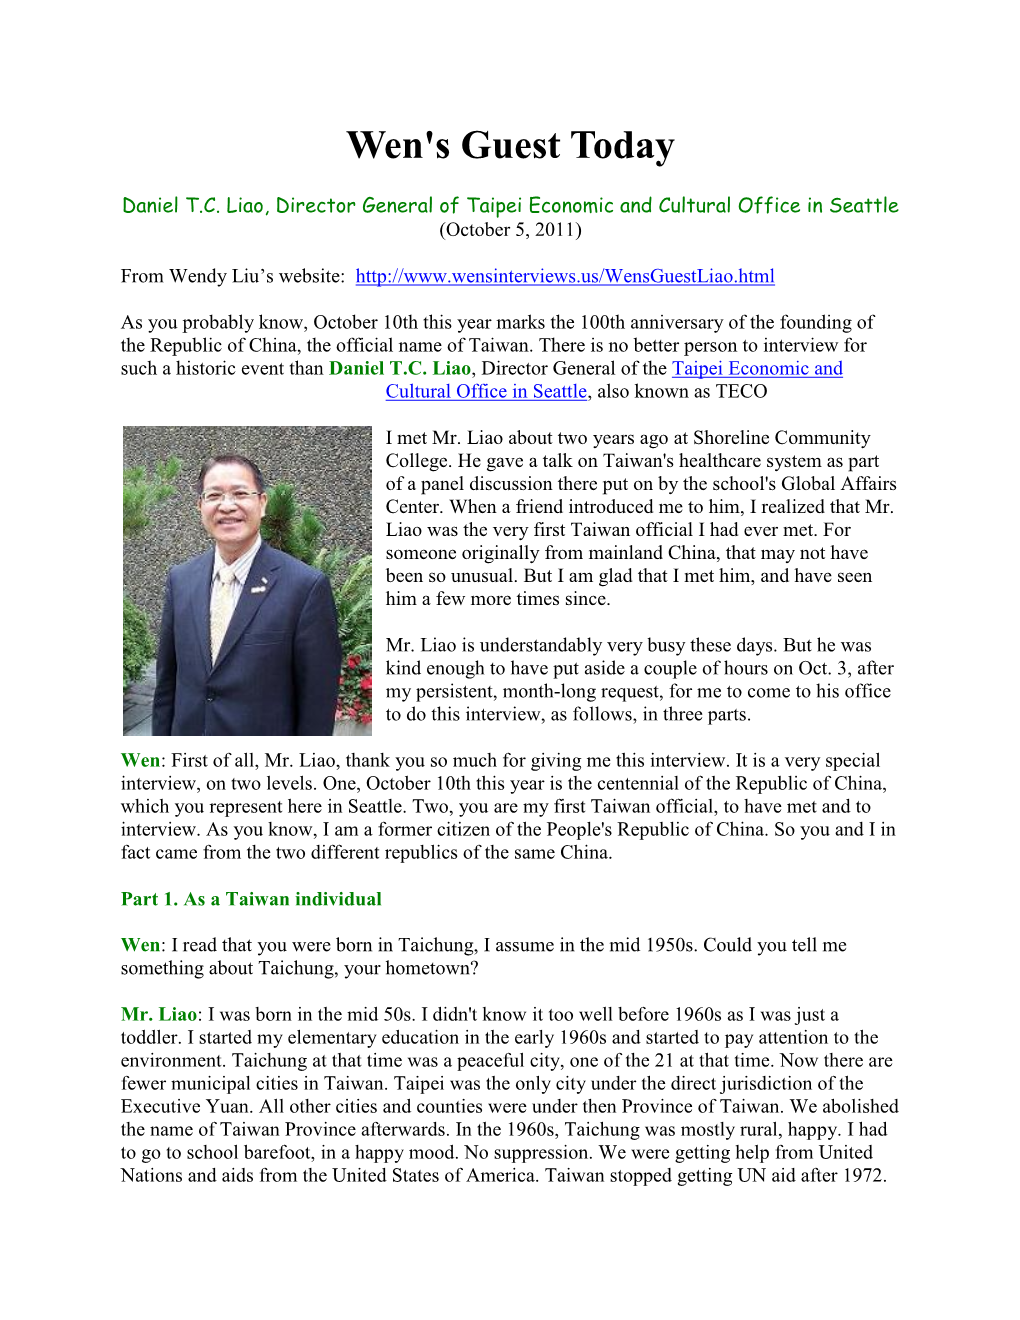 10/6/11 Interview with Daniel Liao (Pdf)